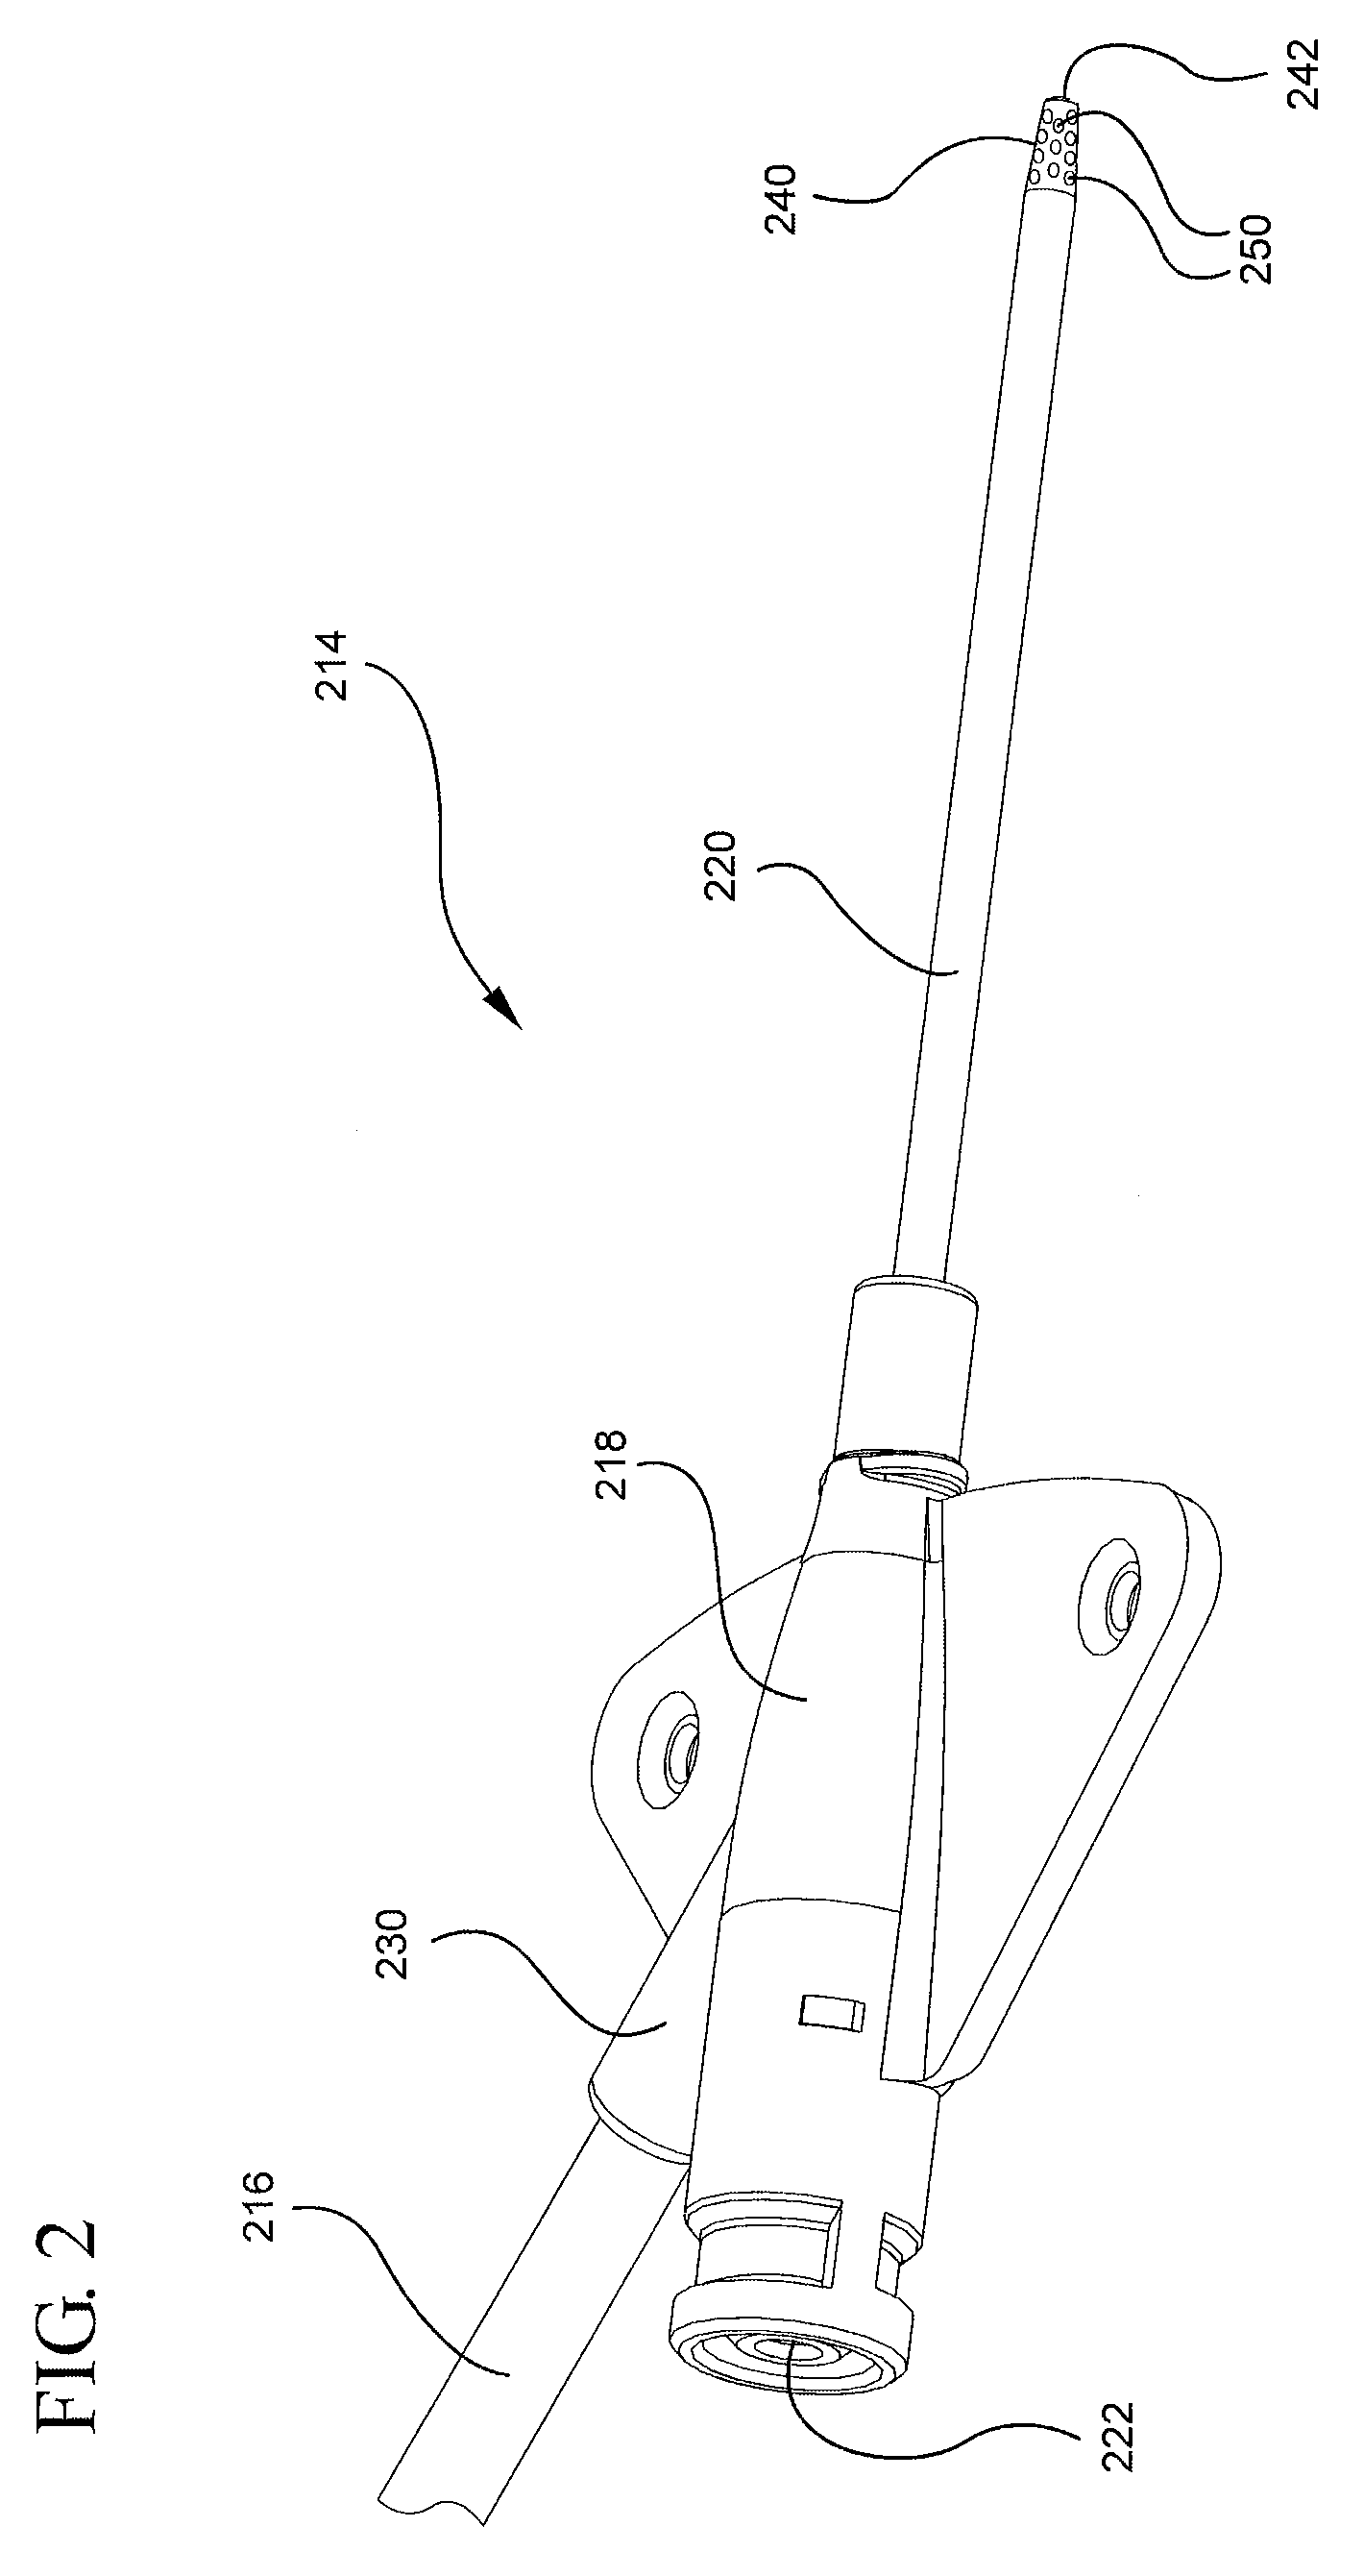 Systems and methods for improving catheter hole array efficiency